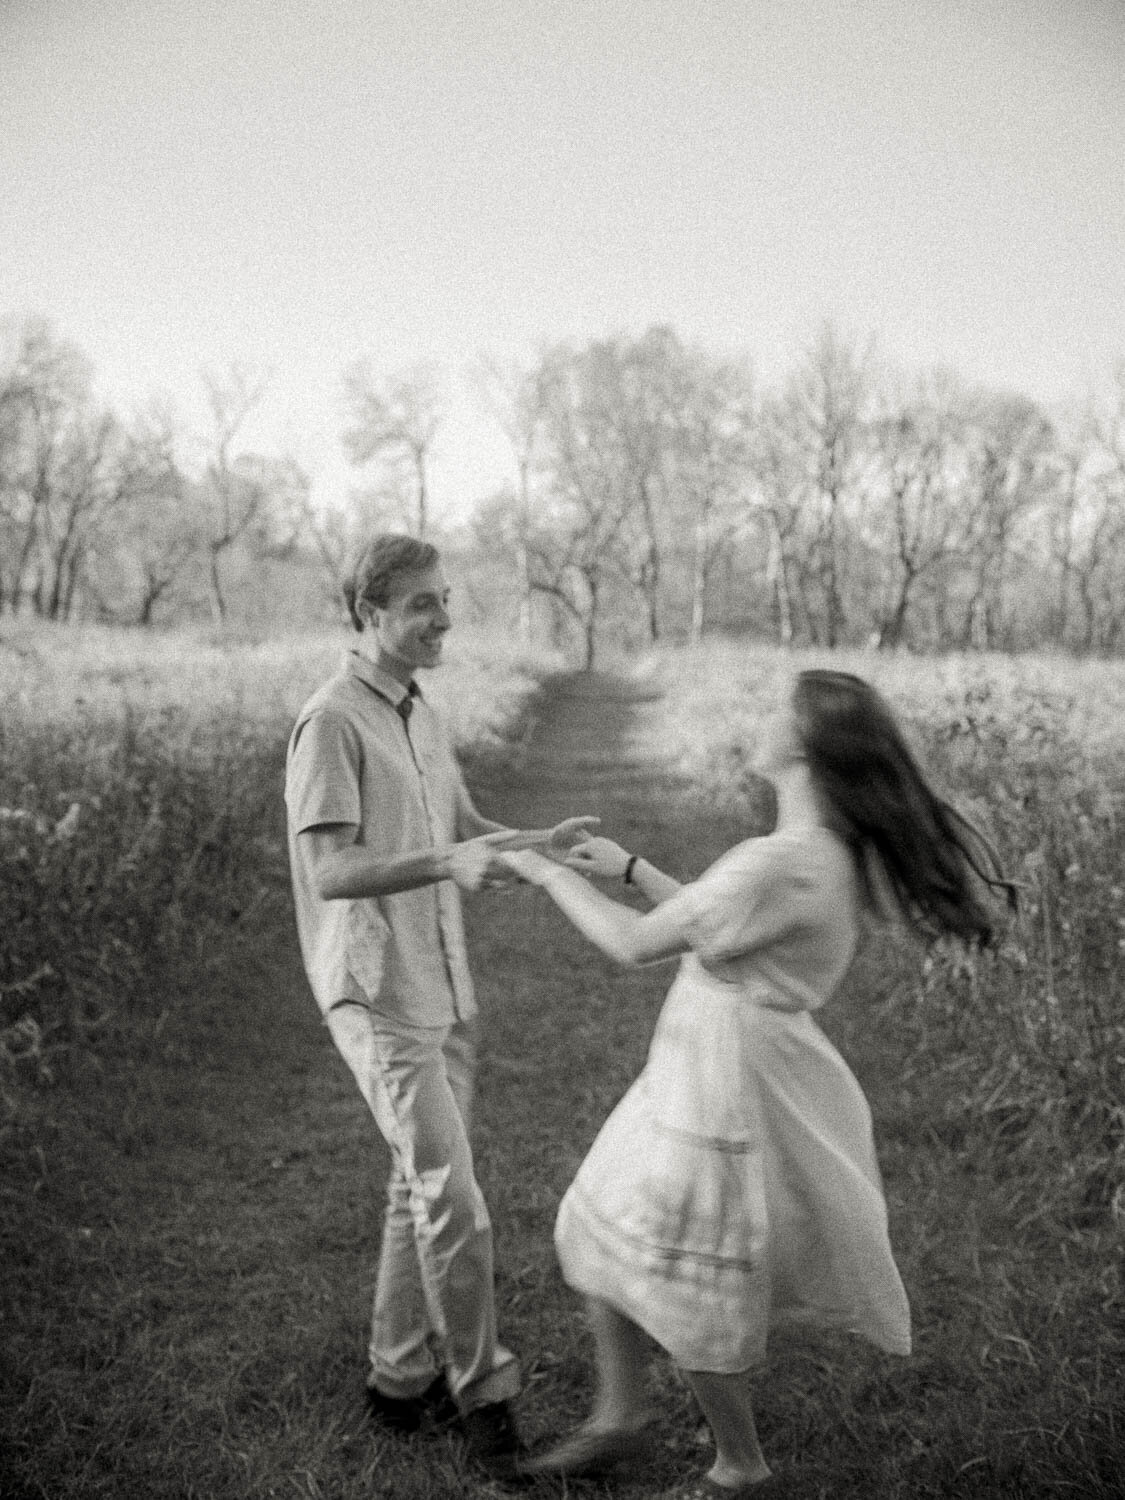 man-and-woman-spinning-through-field-during-golden-hour-for-their-fall-engagement-session.jpg